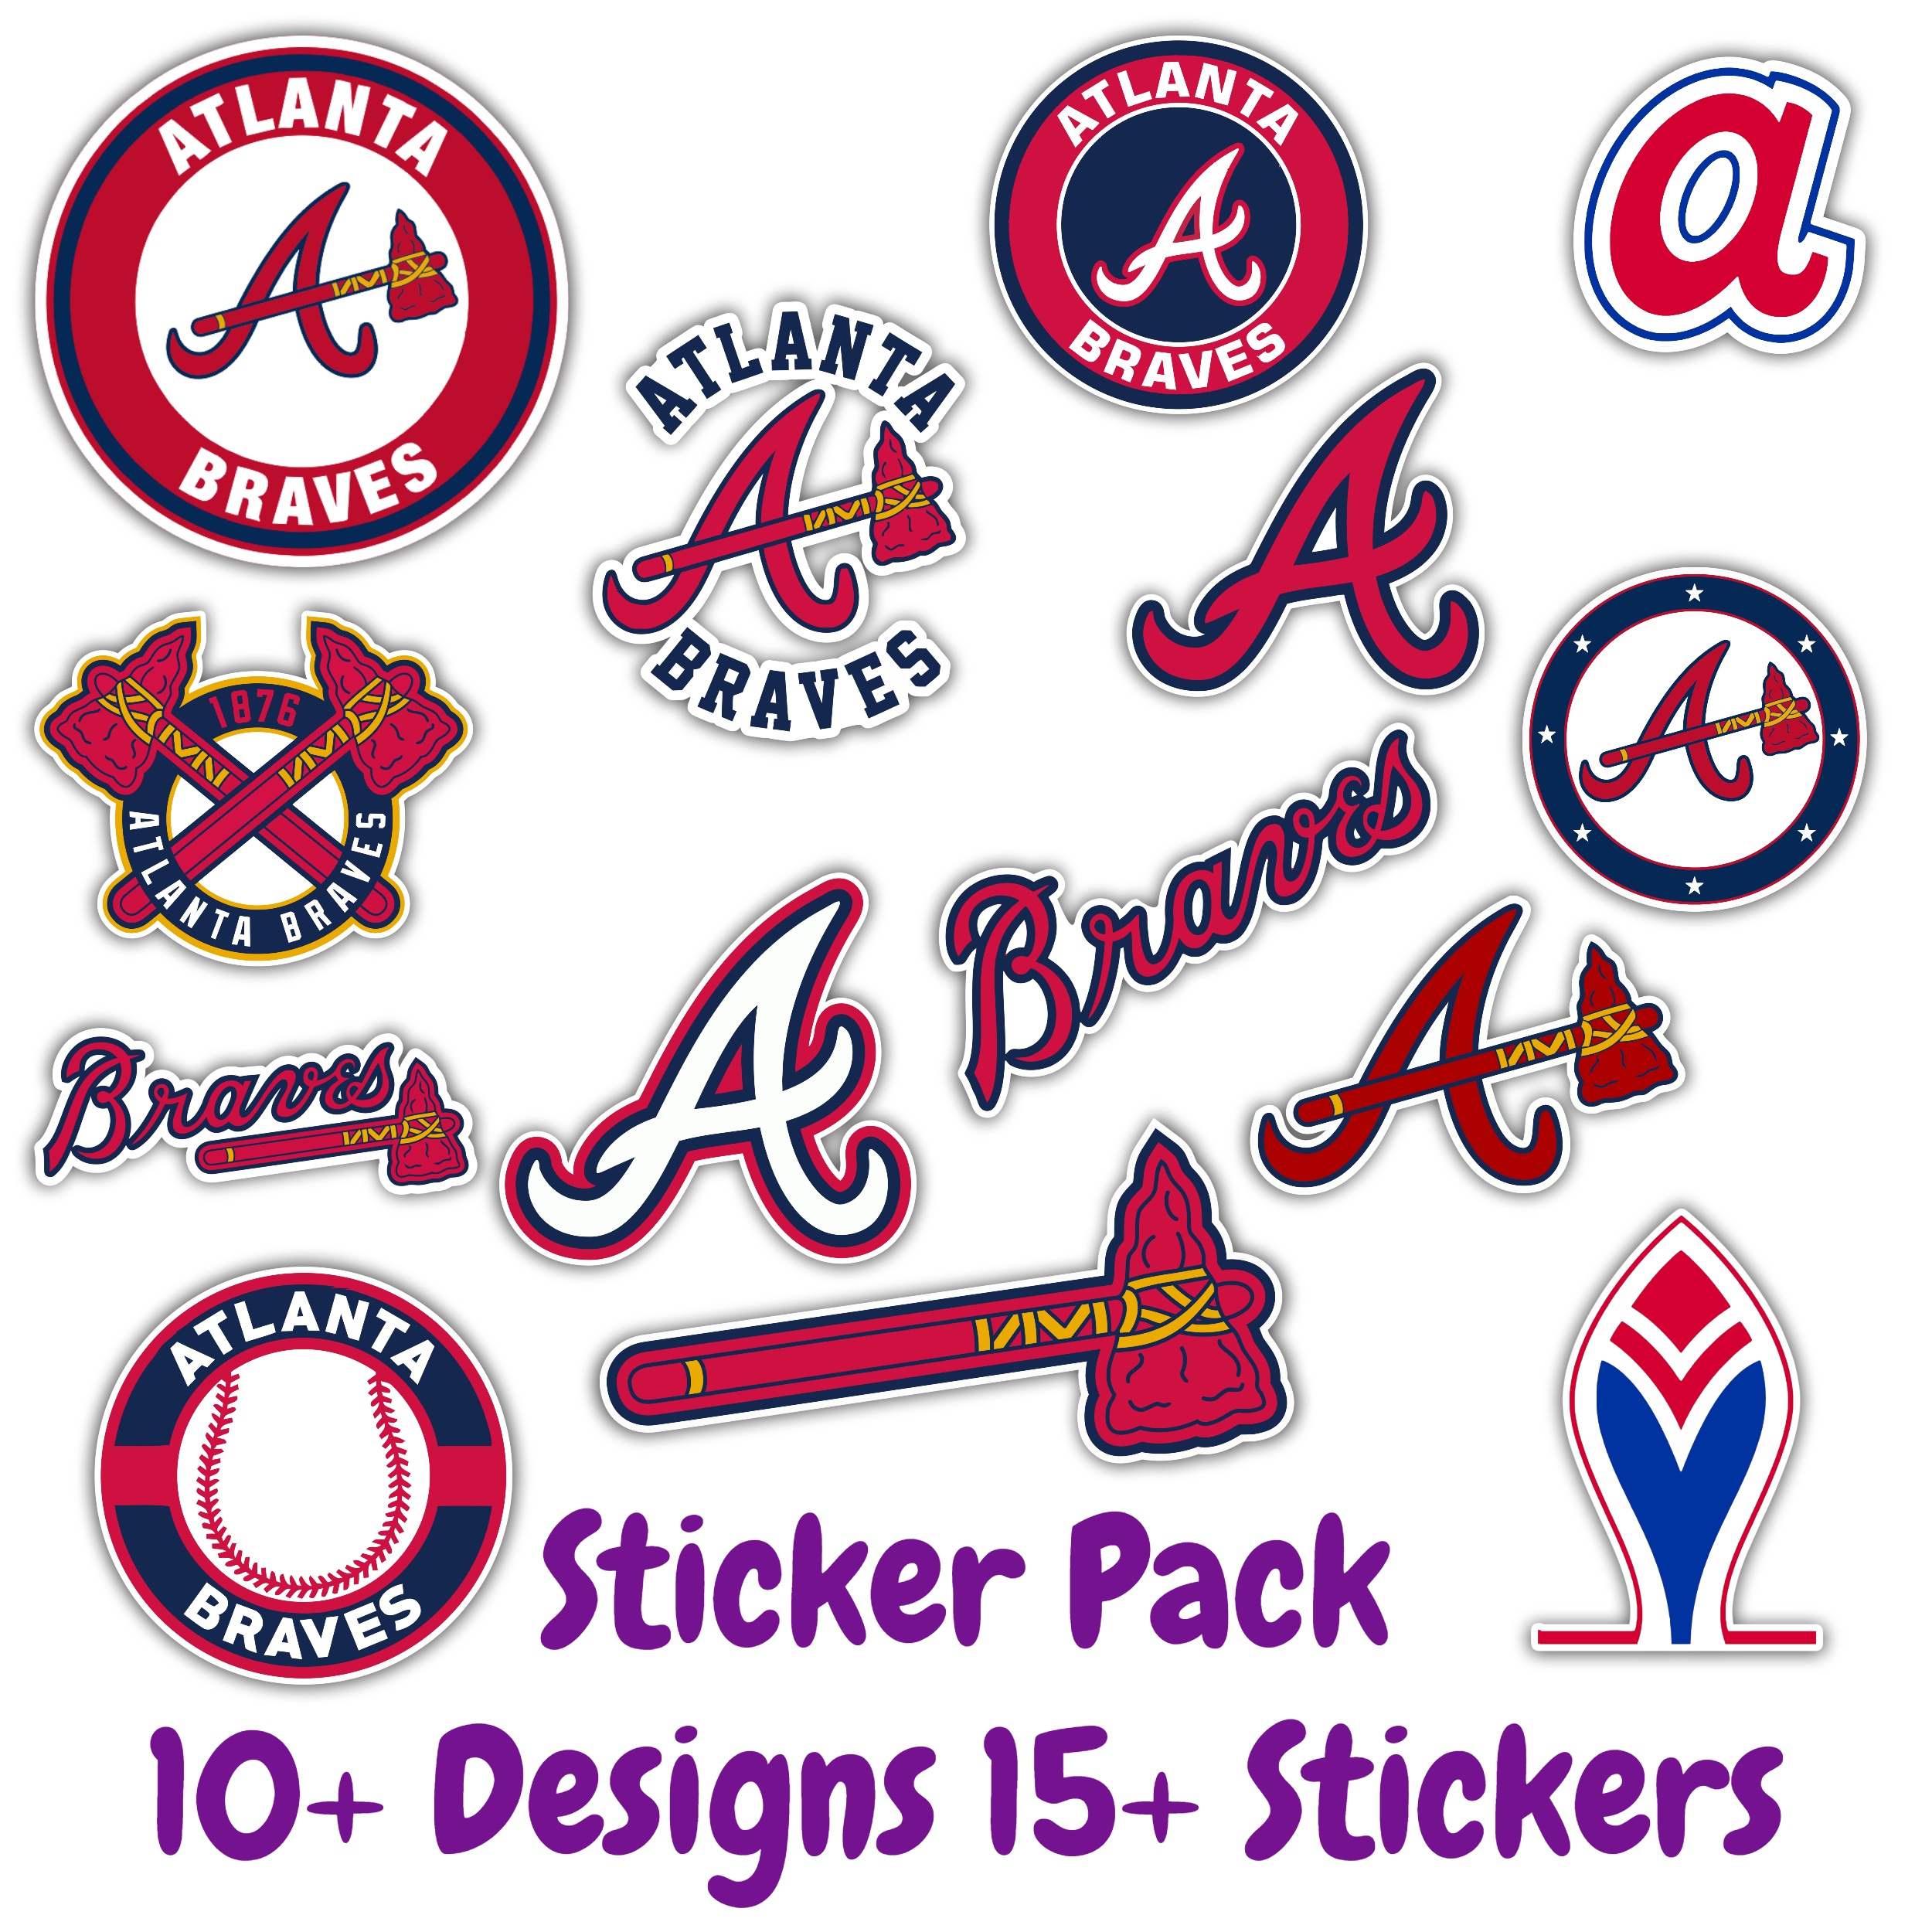 Atlanta Braves Sticker Pack; Hydroflask decal ; Laptop Decal ; Yeti Decal;  Cell phone Decal; Vinyl Car Decal- Custom Size – Biggest Decal Shop